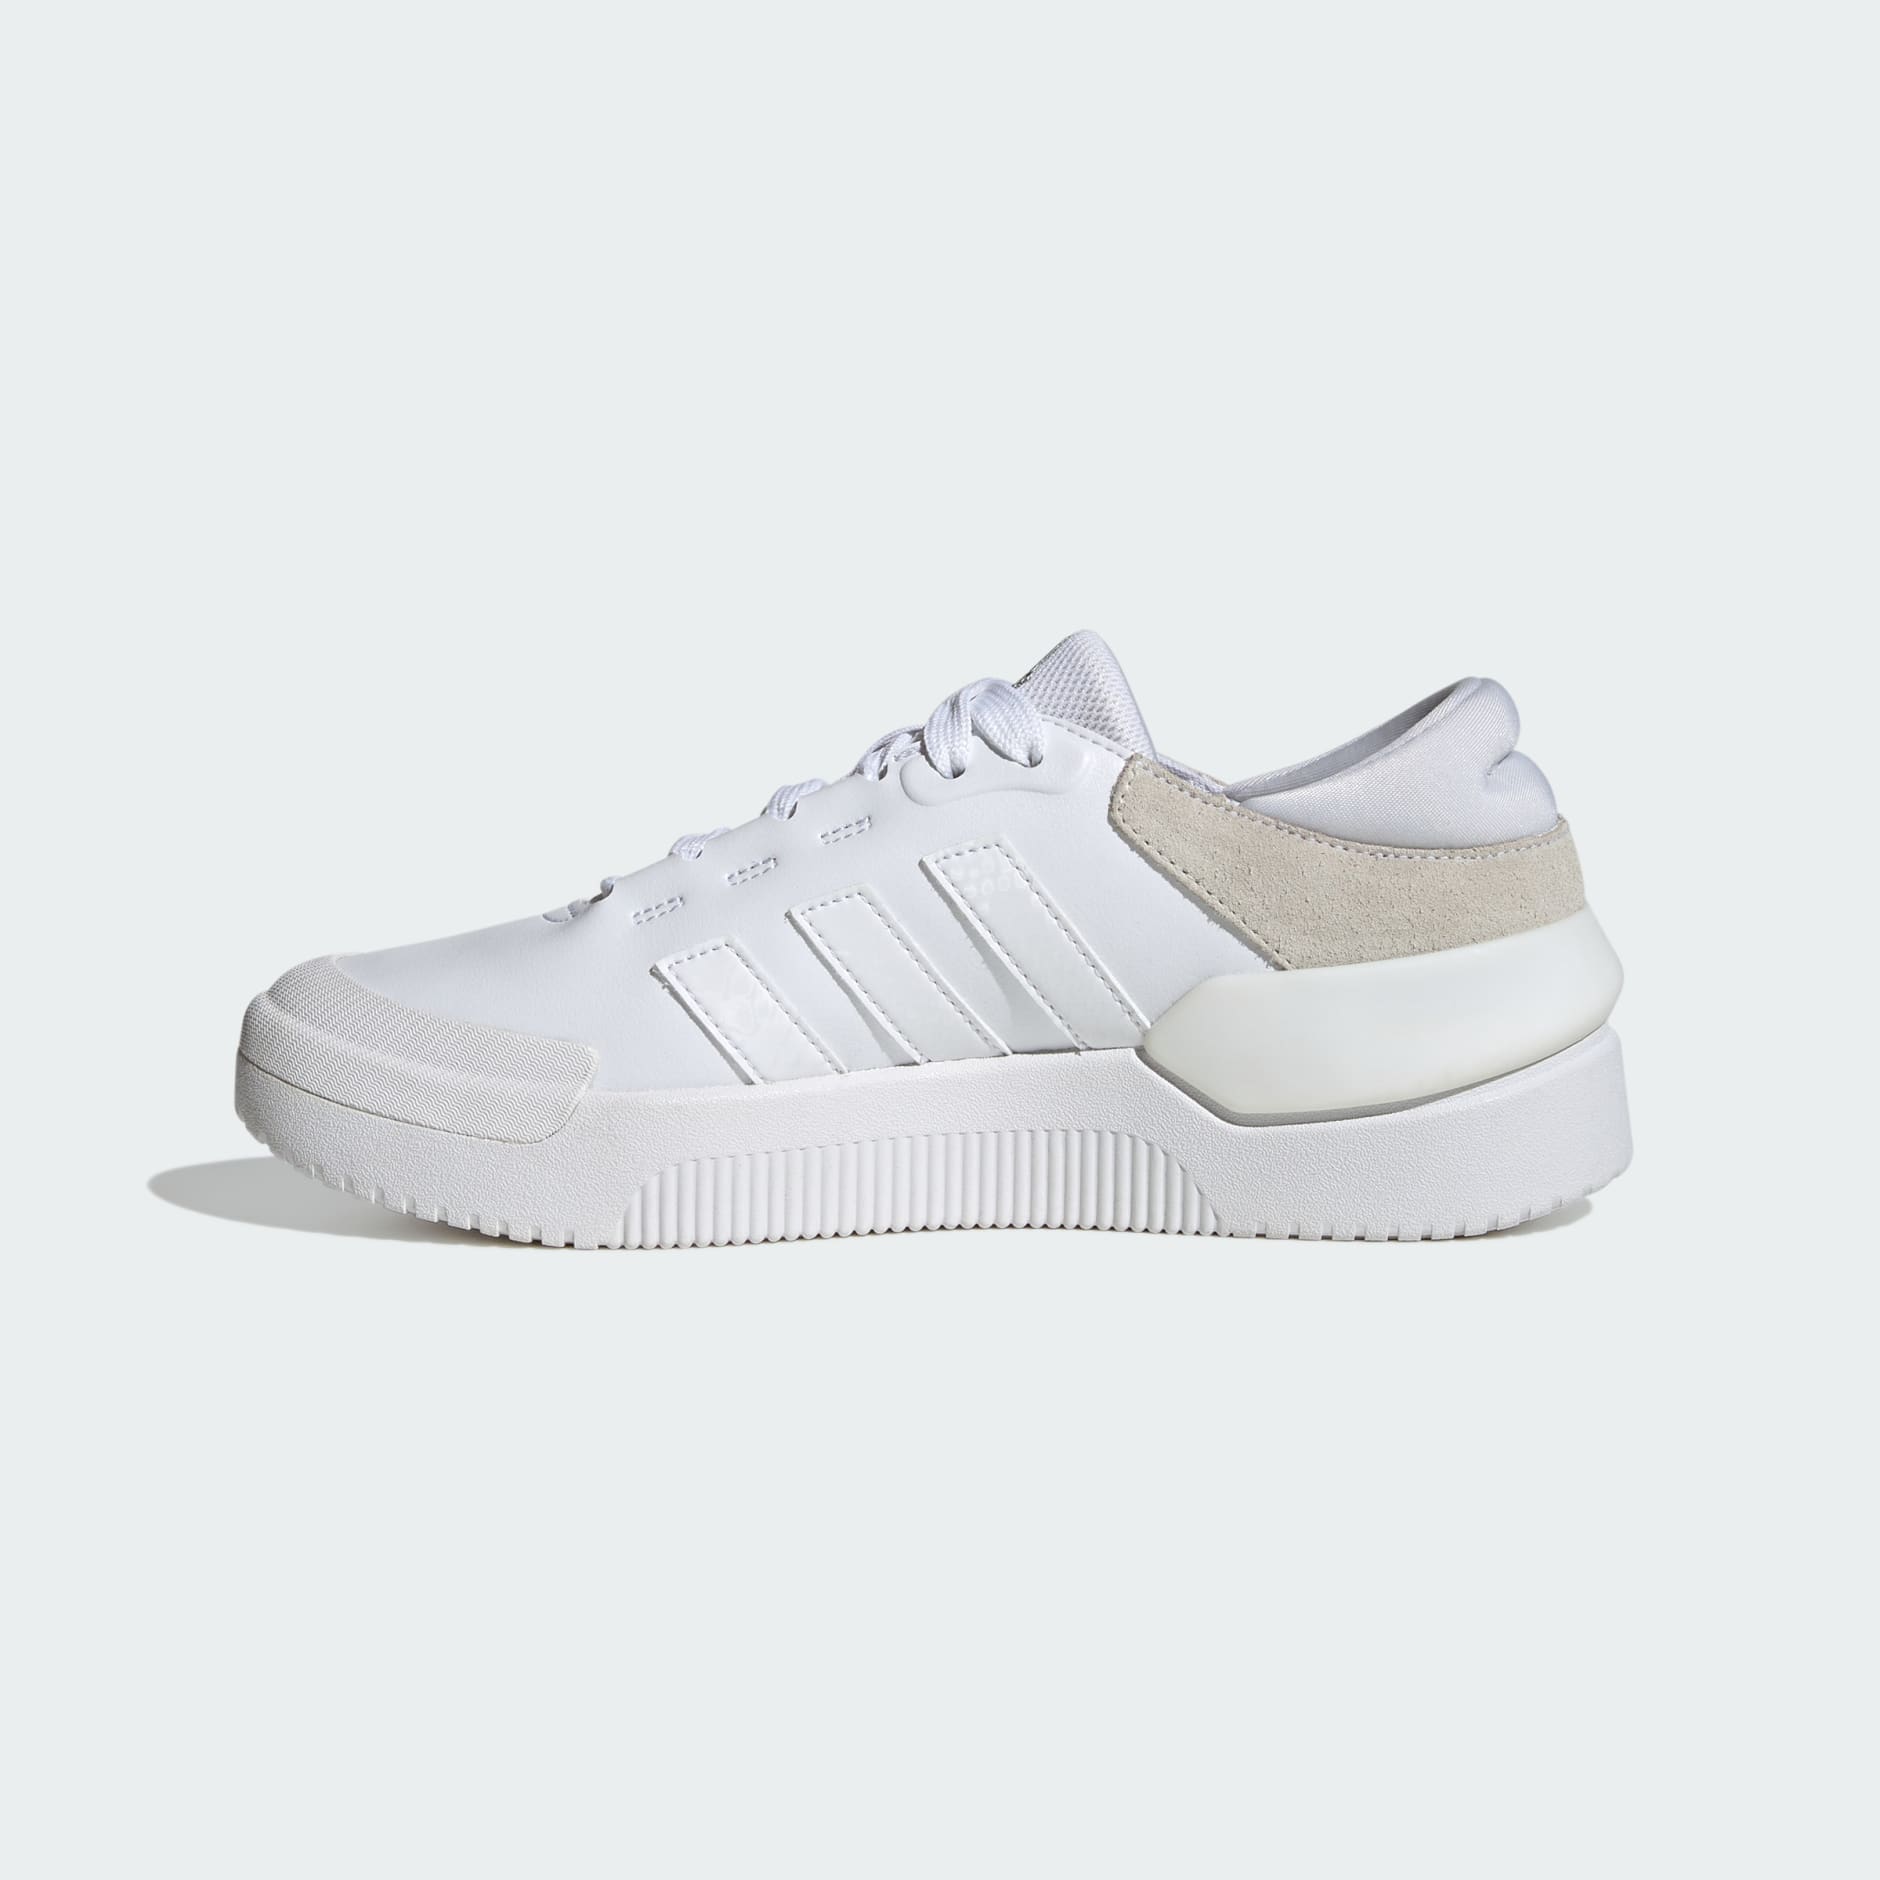 Adidas Shoes For Women - Buy Adidas Ladies Shoes Online at Best Prices in  India | Flipkart.com